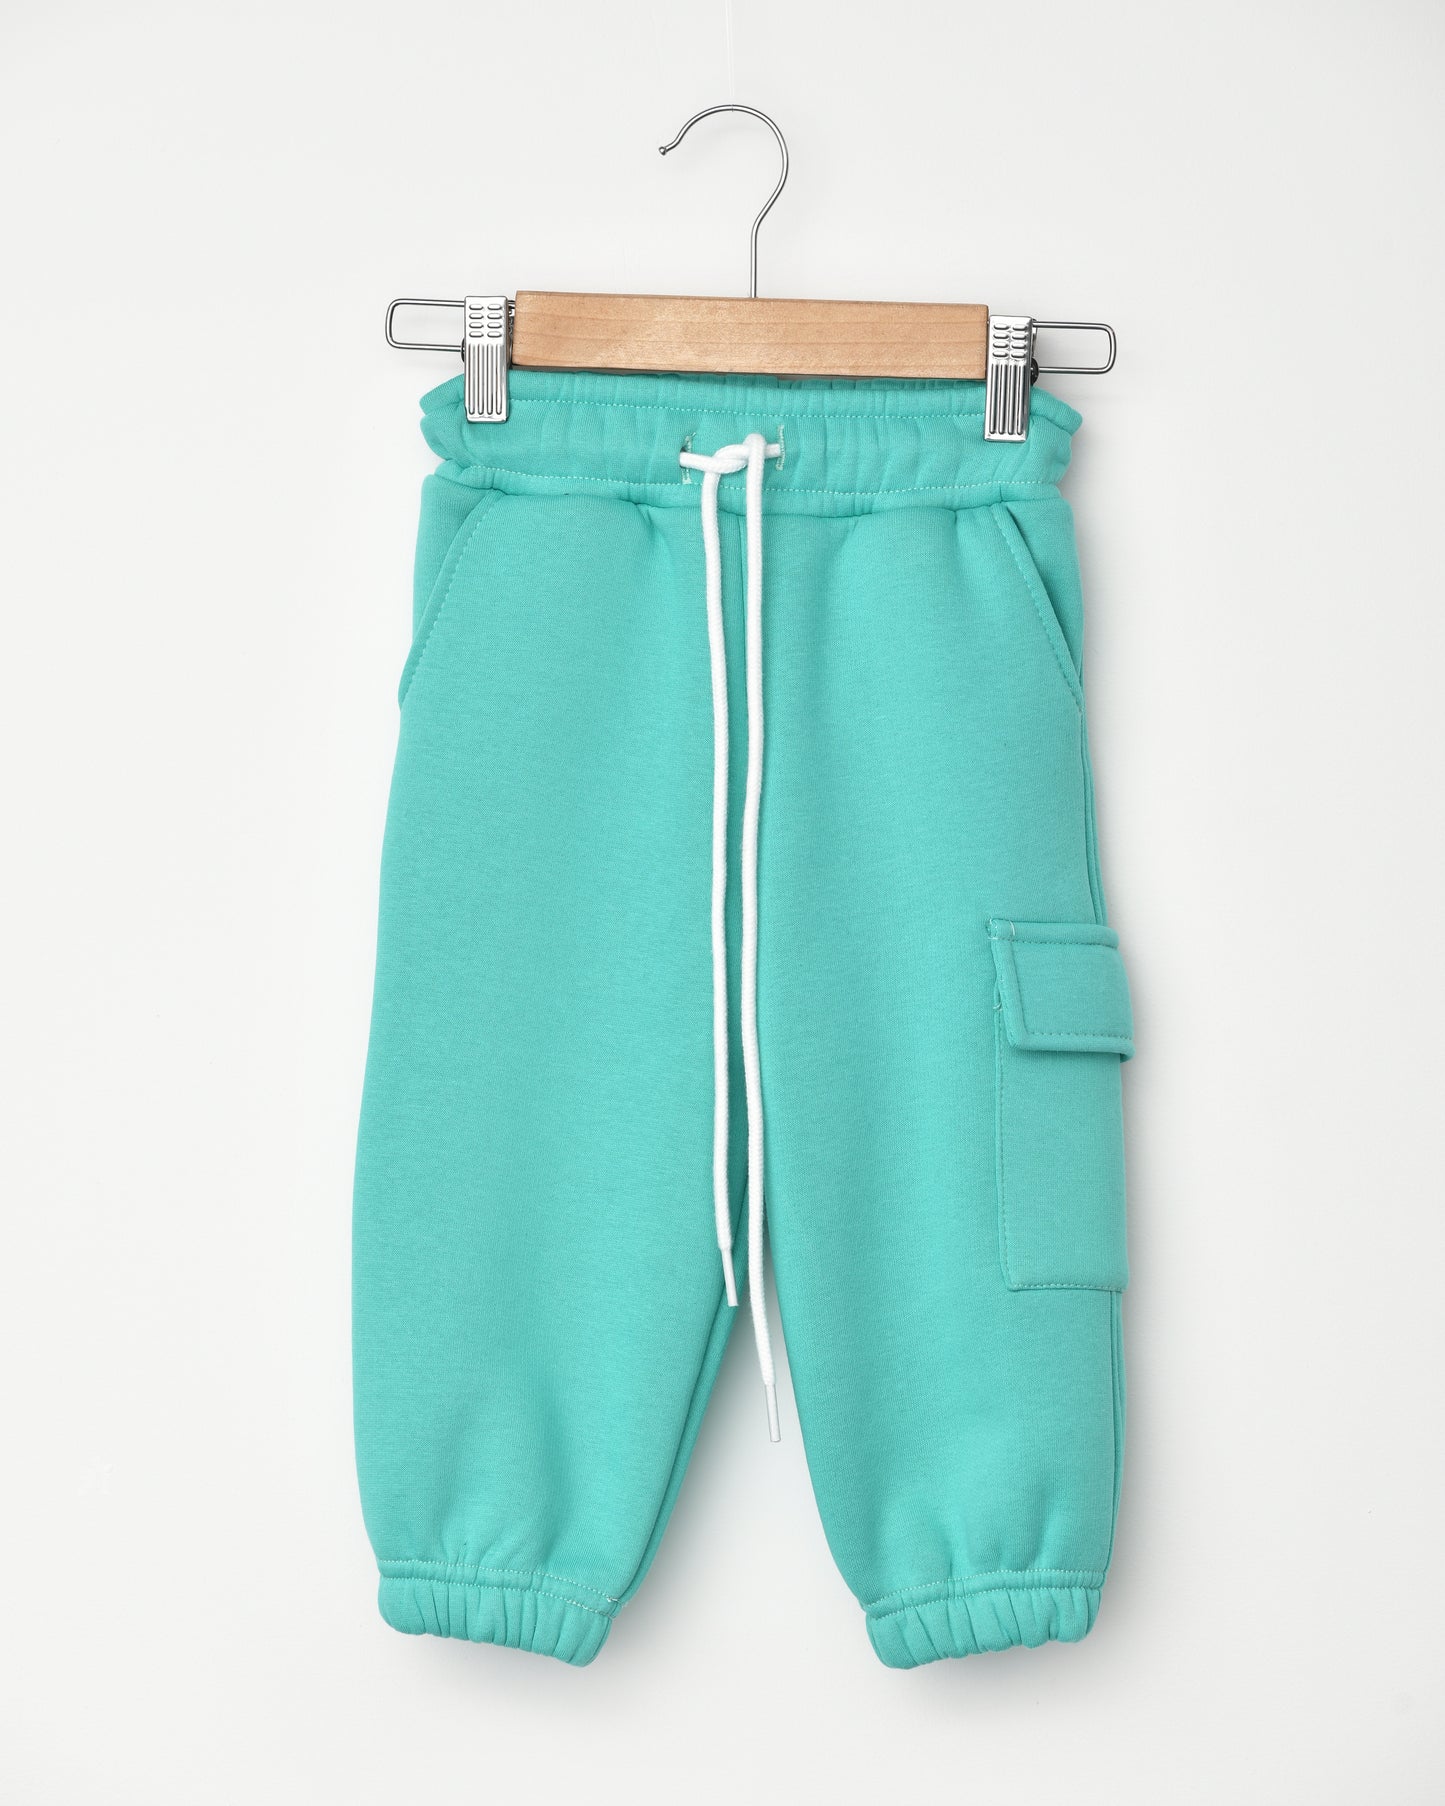 Colorful Pants for kids